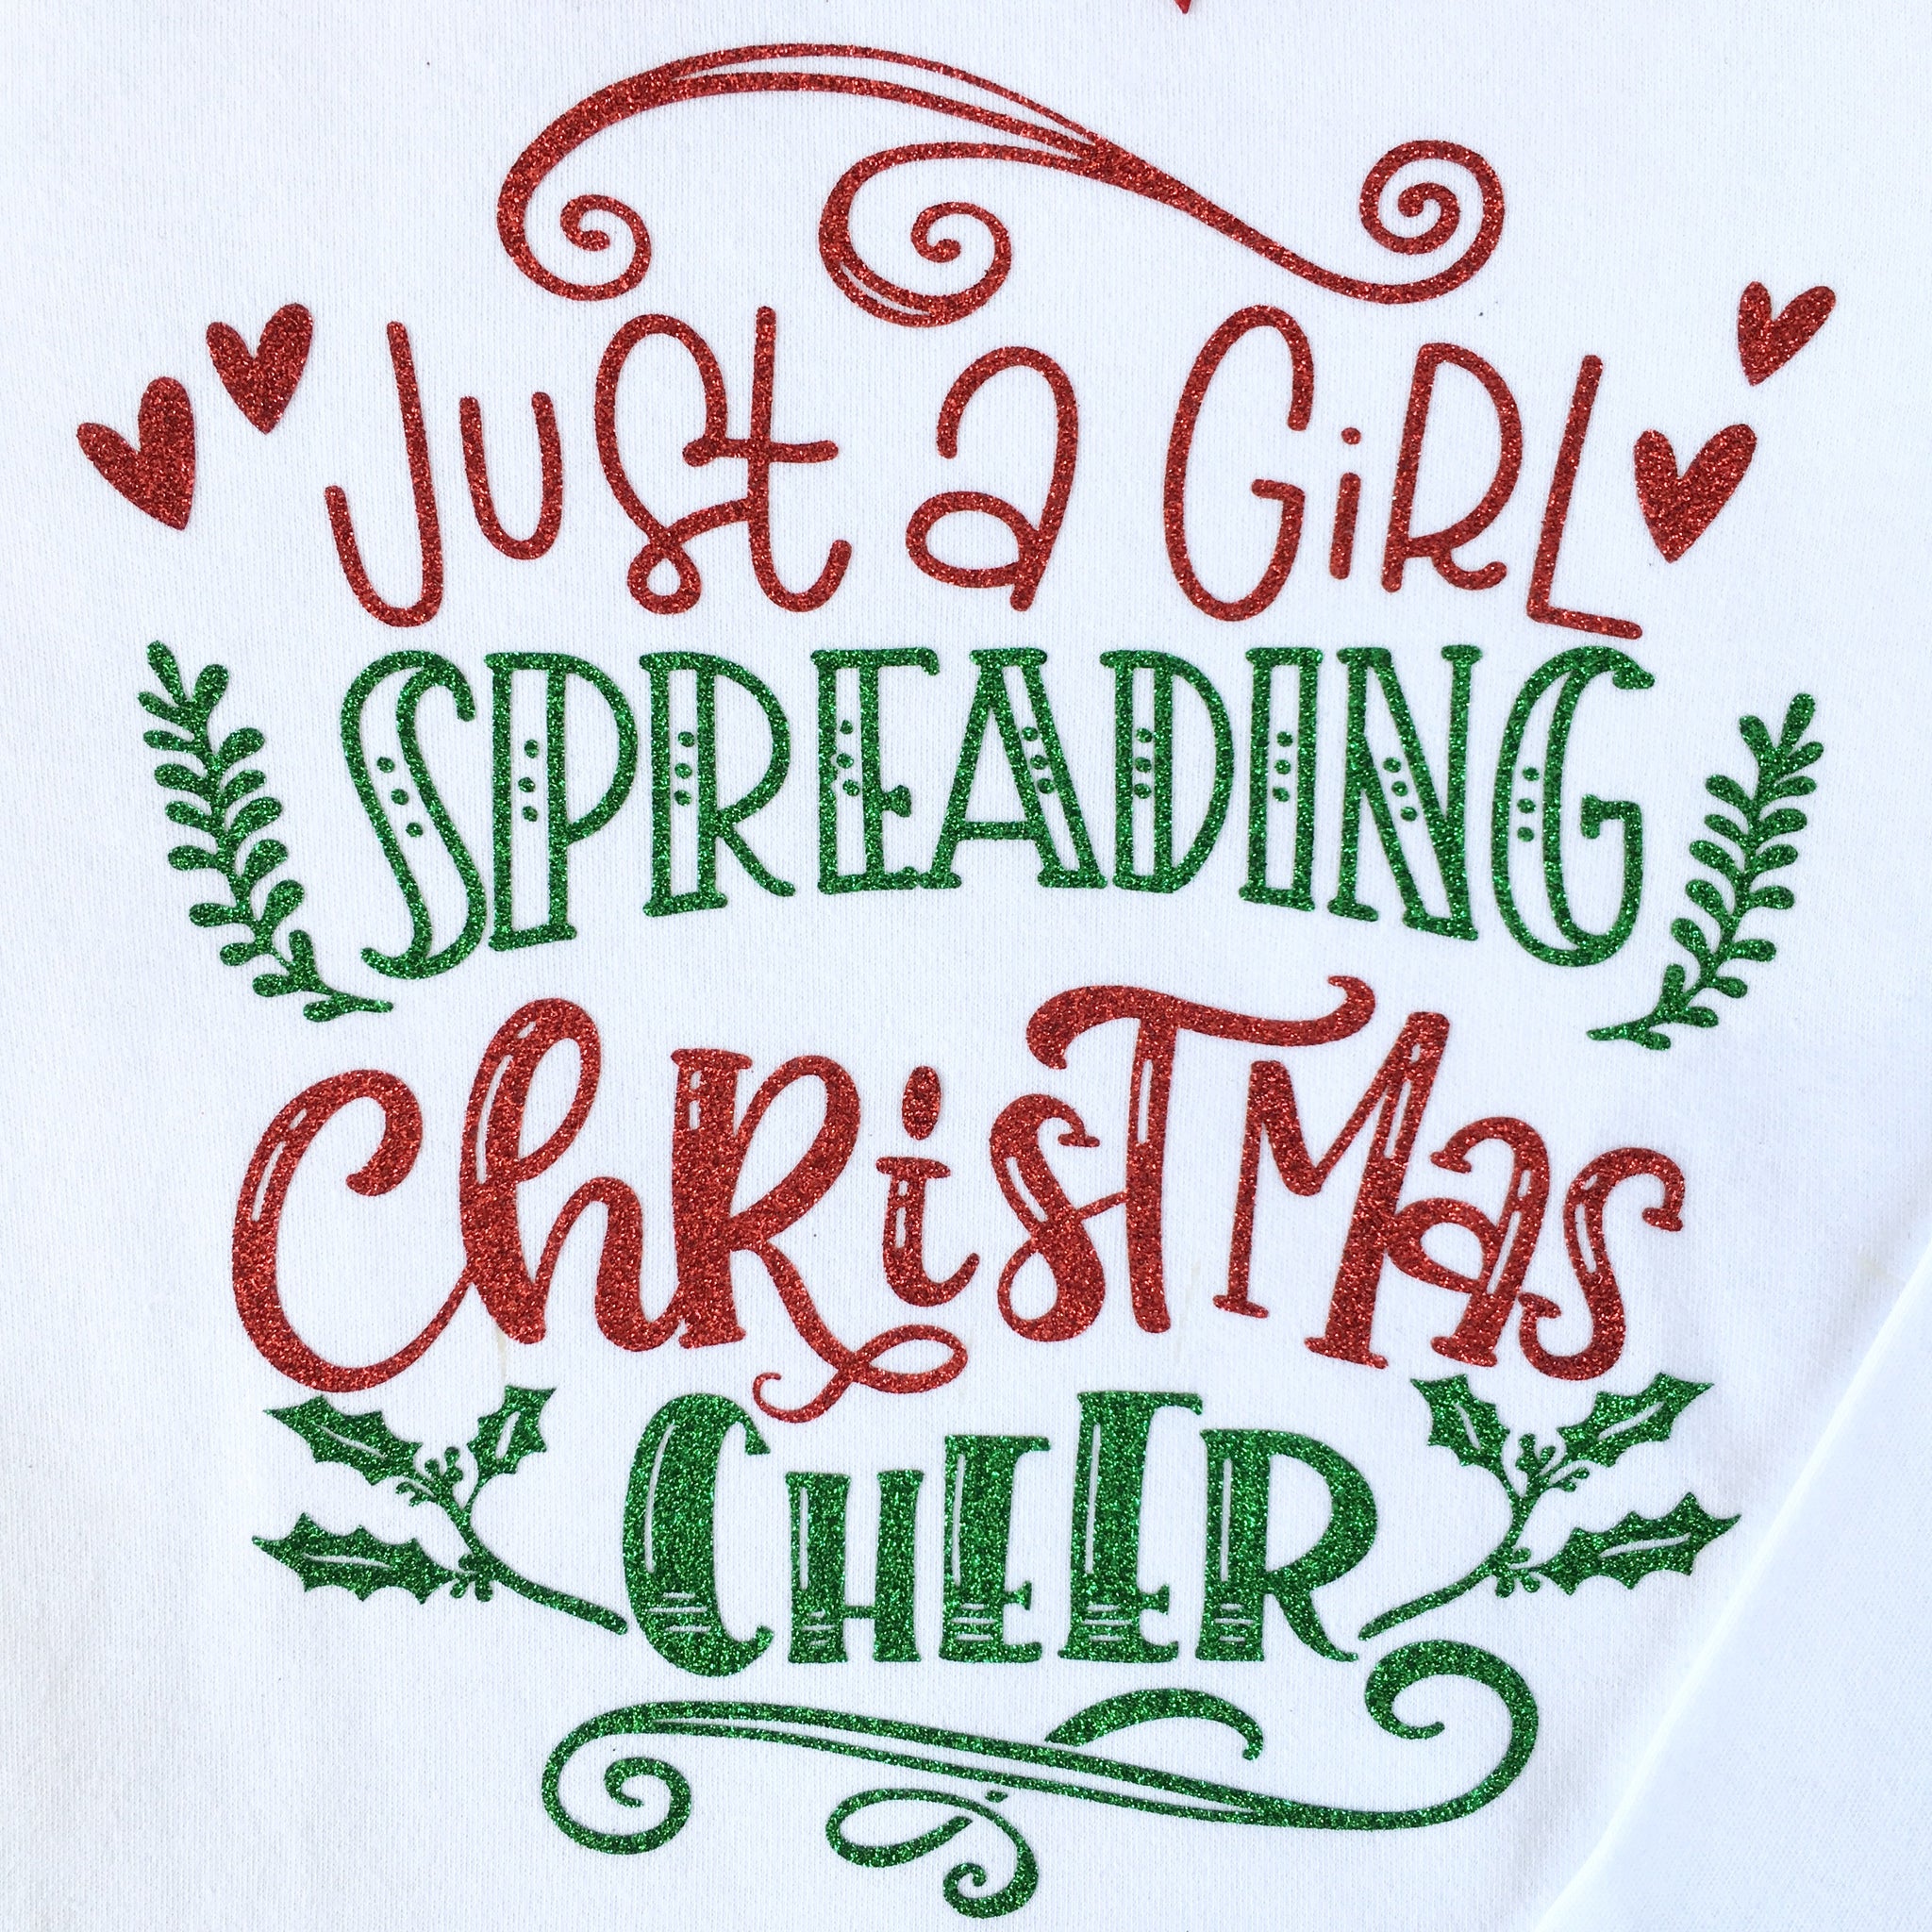 Jolly Christmas Spreading Christmas Cheer Shirt "ONLY"